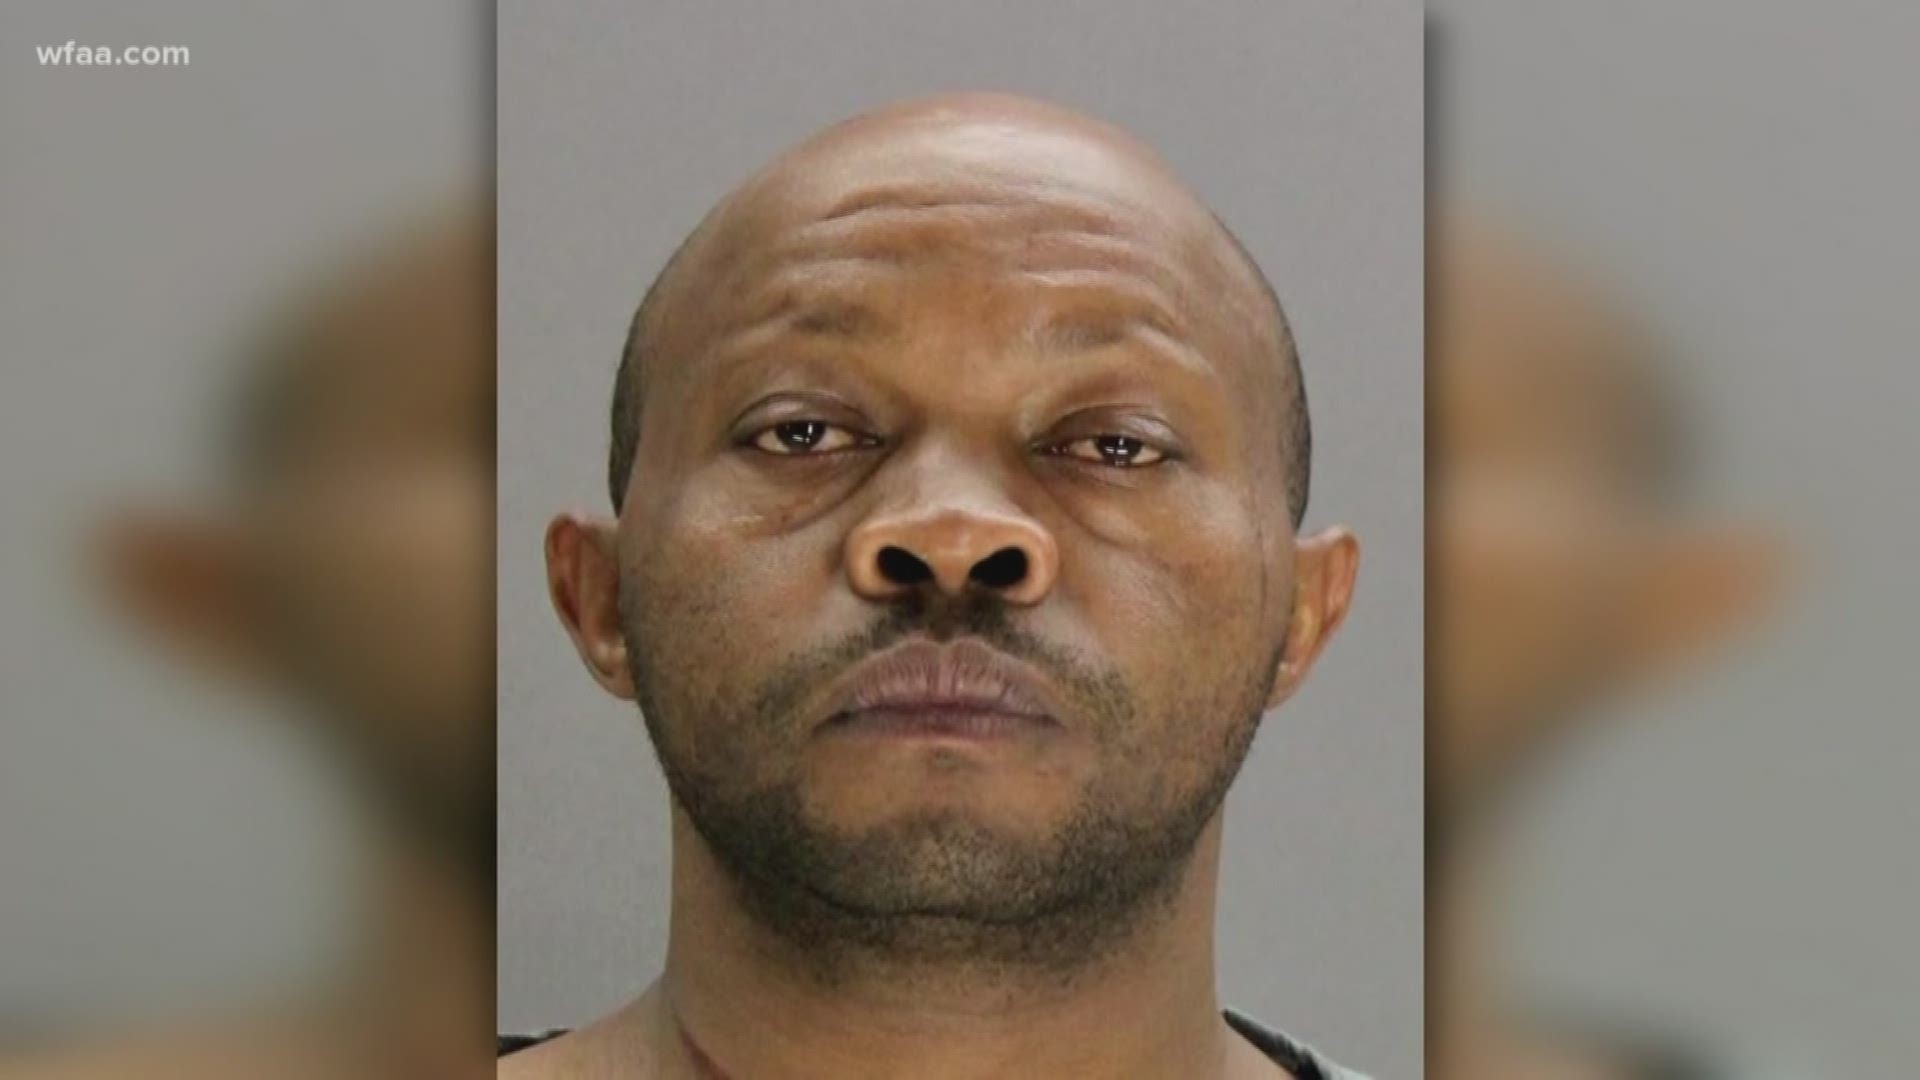 Chemirmir, 47, is charged with 12 counts of capital murder in connection with the deaths of elderly women in Dallas and Collin counties.